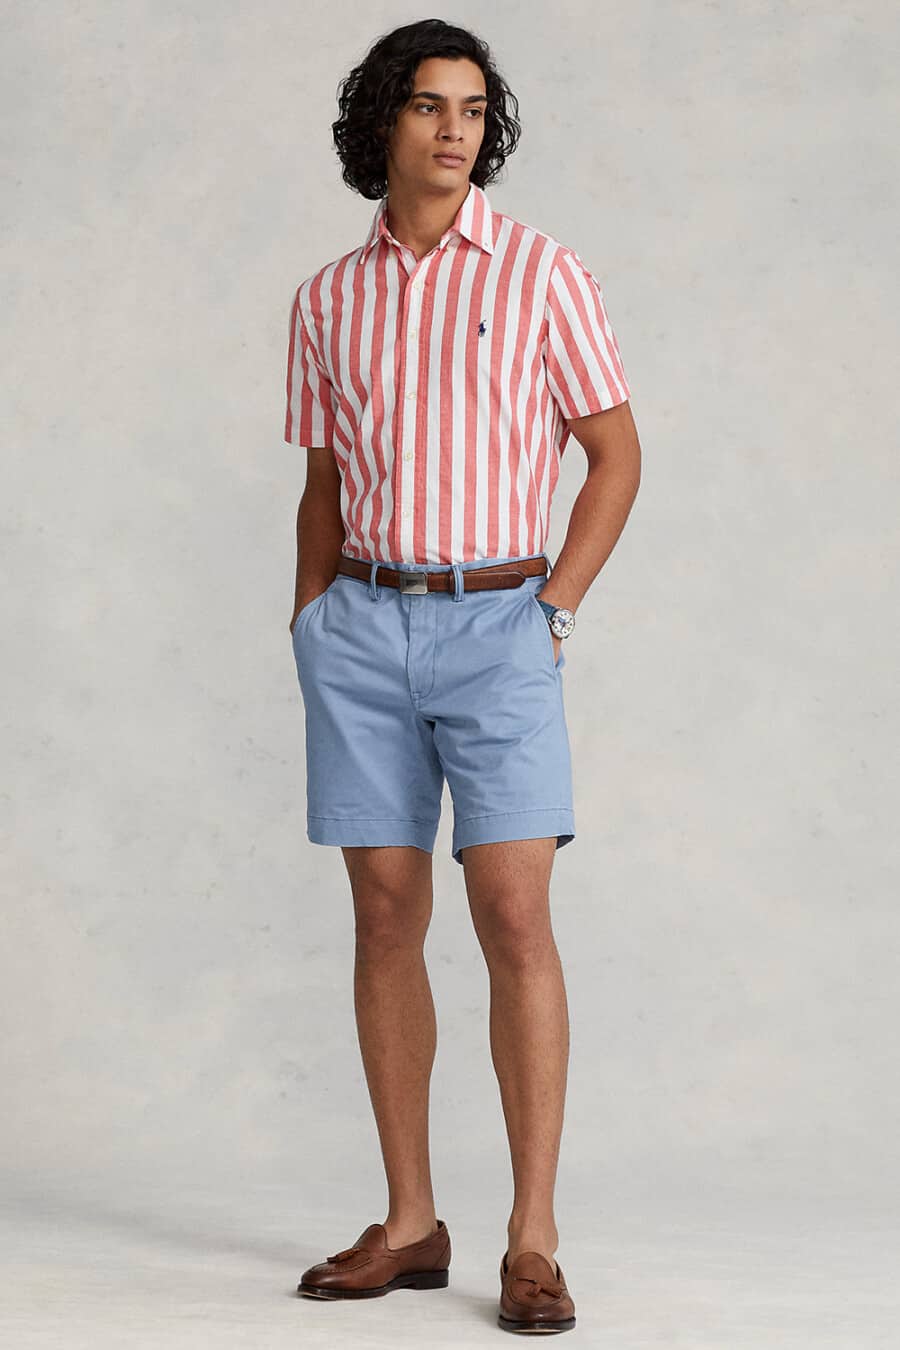 Men's pastel blue shorts, pink and white vertical striped shirt, brown leather belt and brown leather tassel loafers outfit